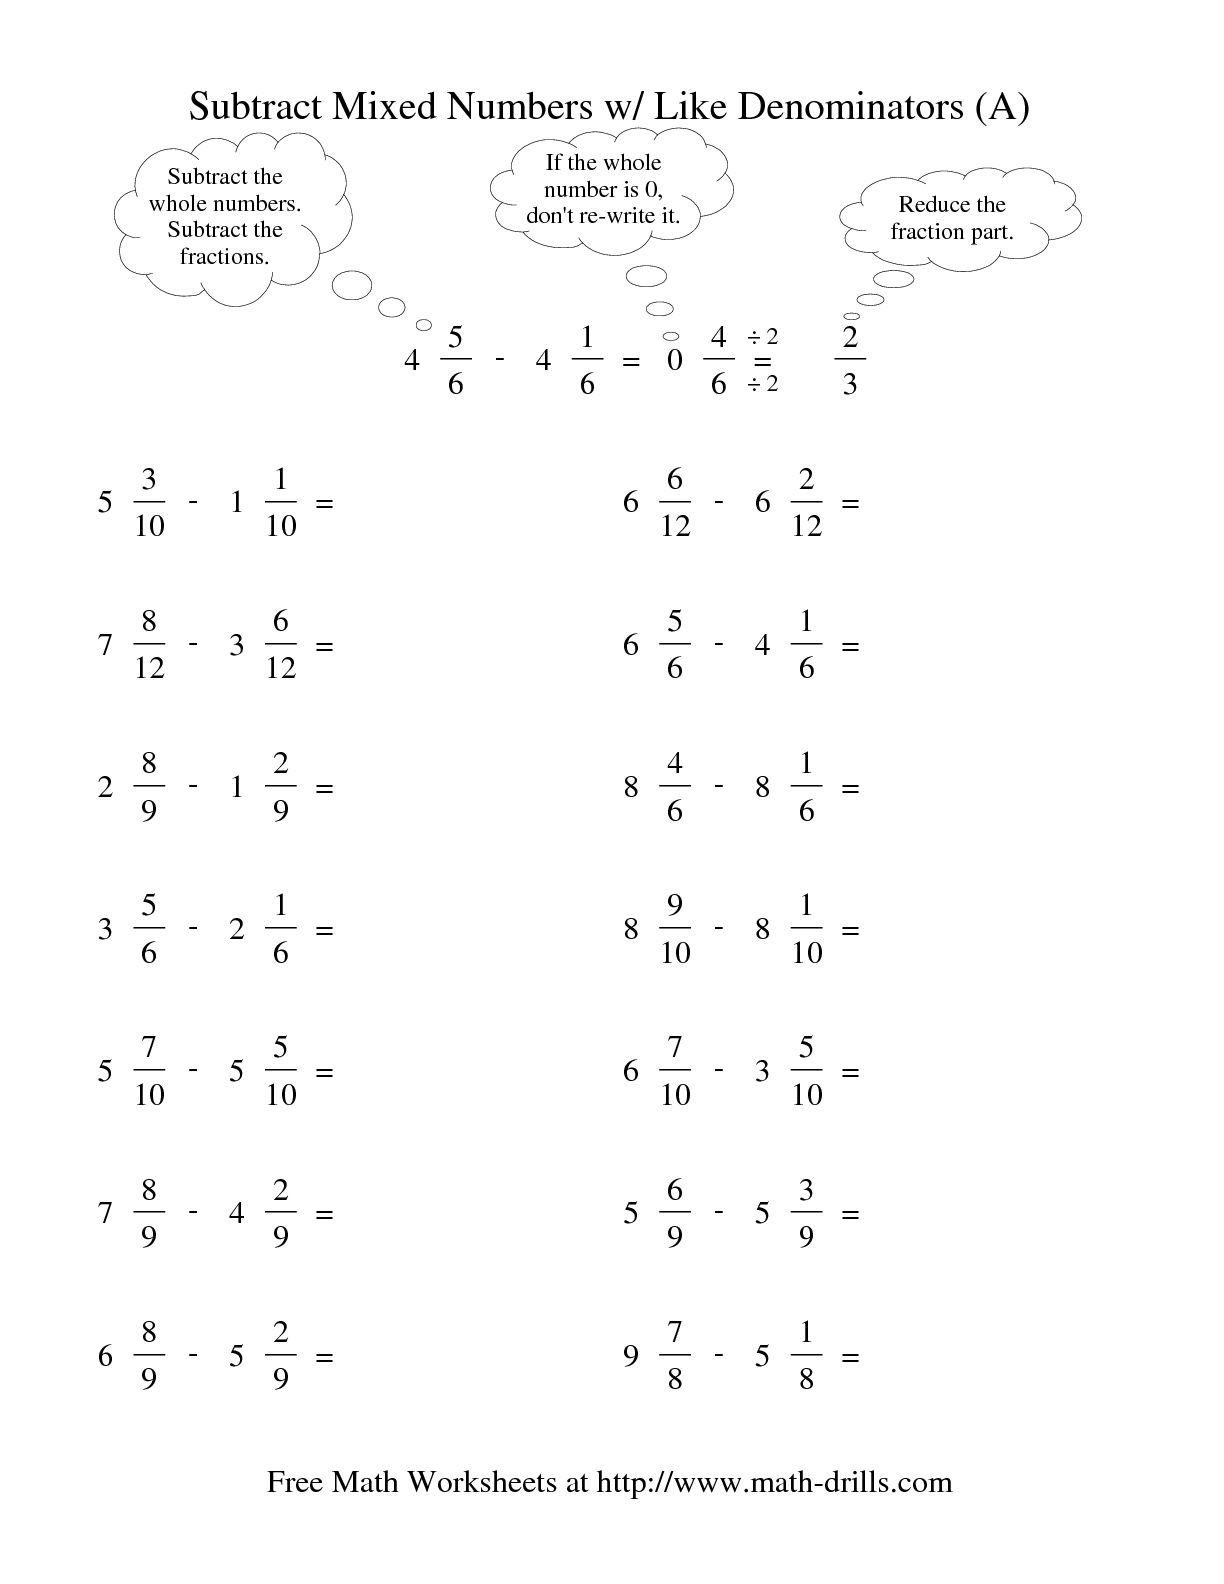 adding-and-subtracting-mixed-numbers-worksheets